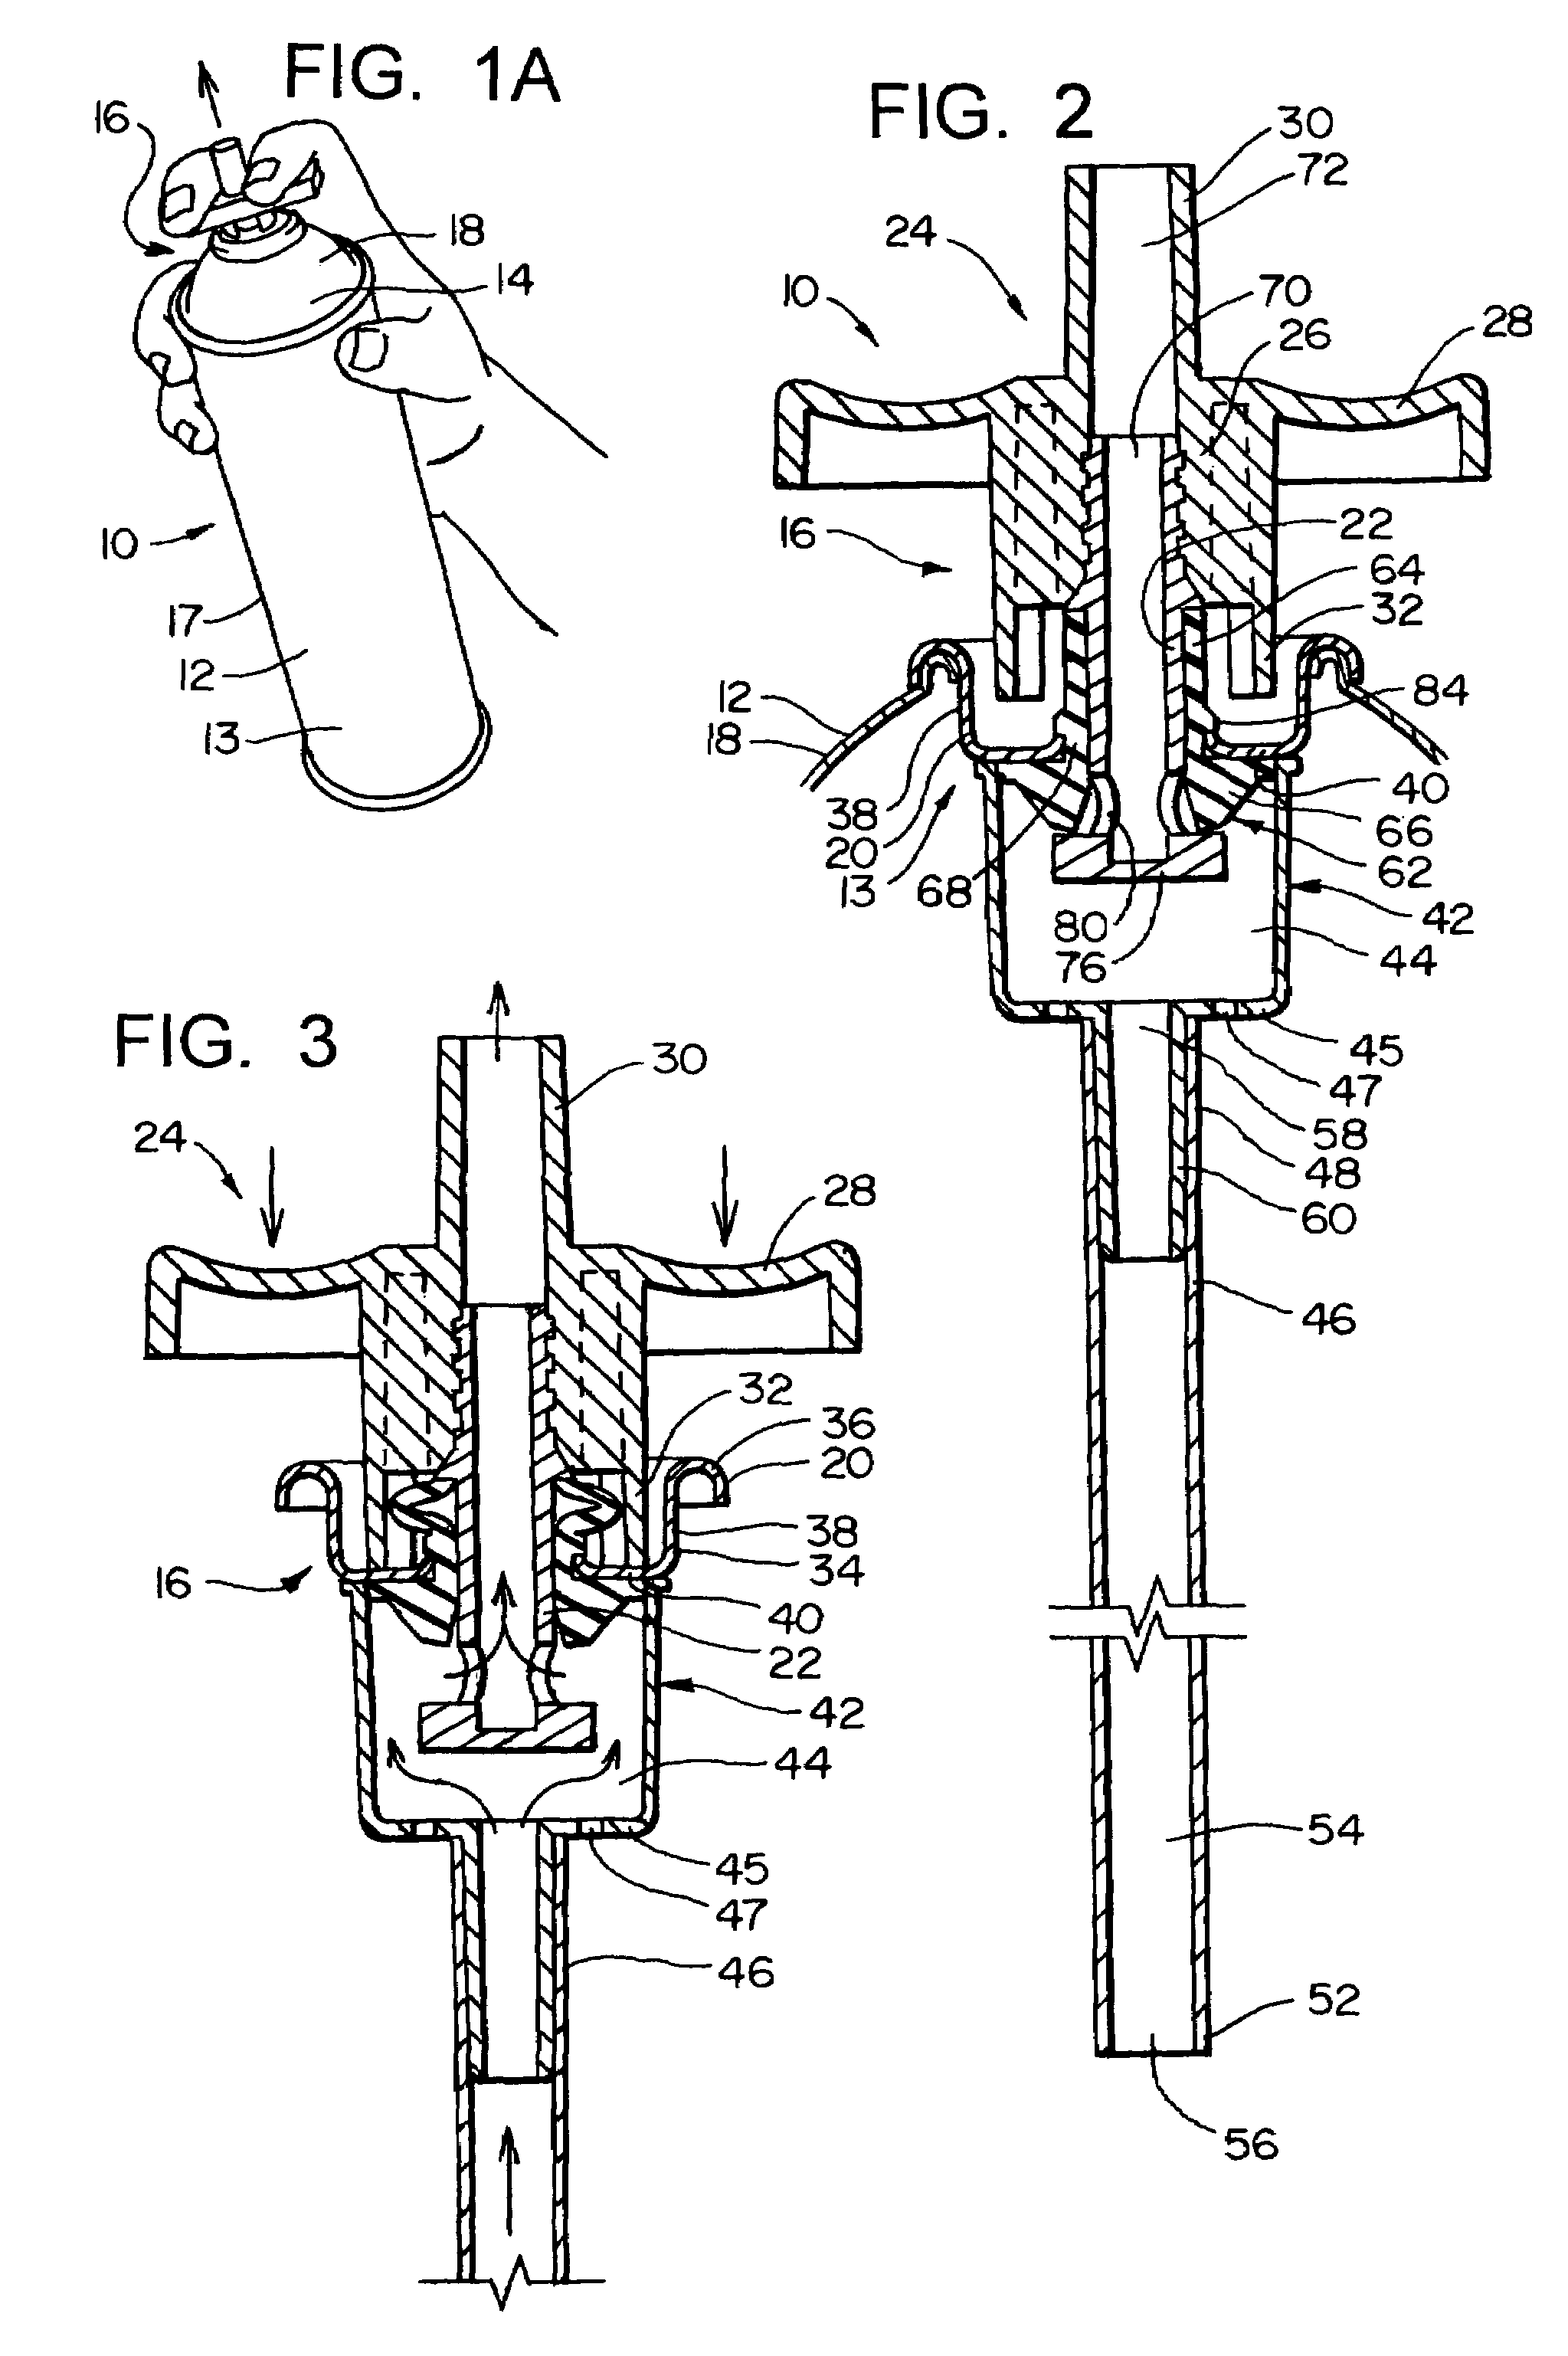 Aerosol spray texture apparatus for a particulate containing material